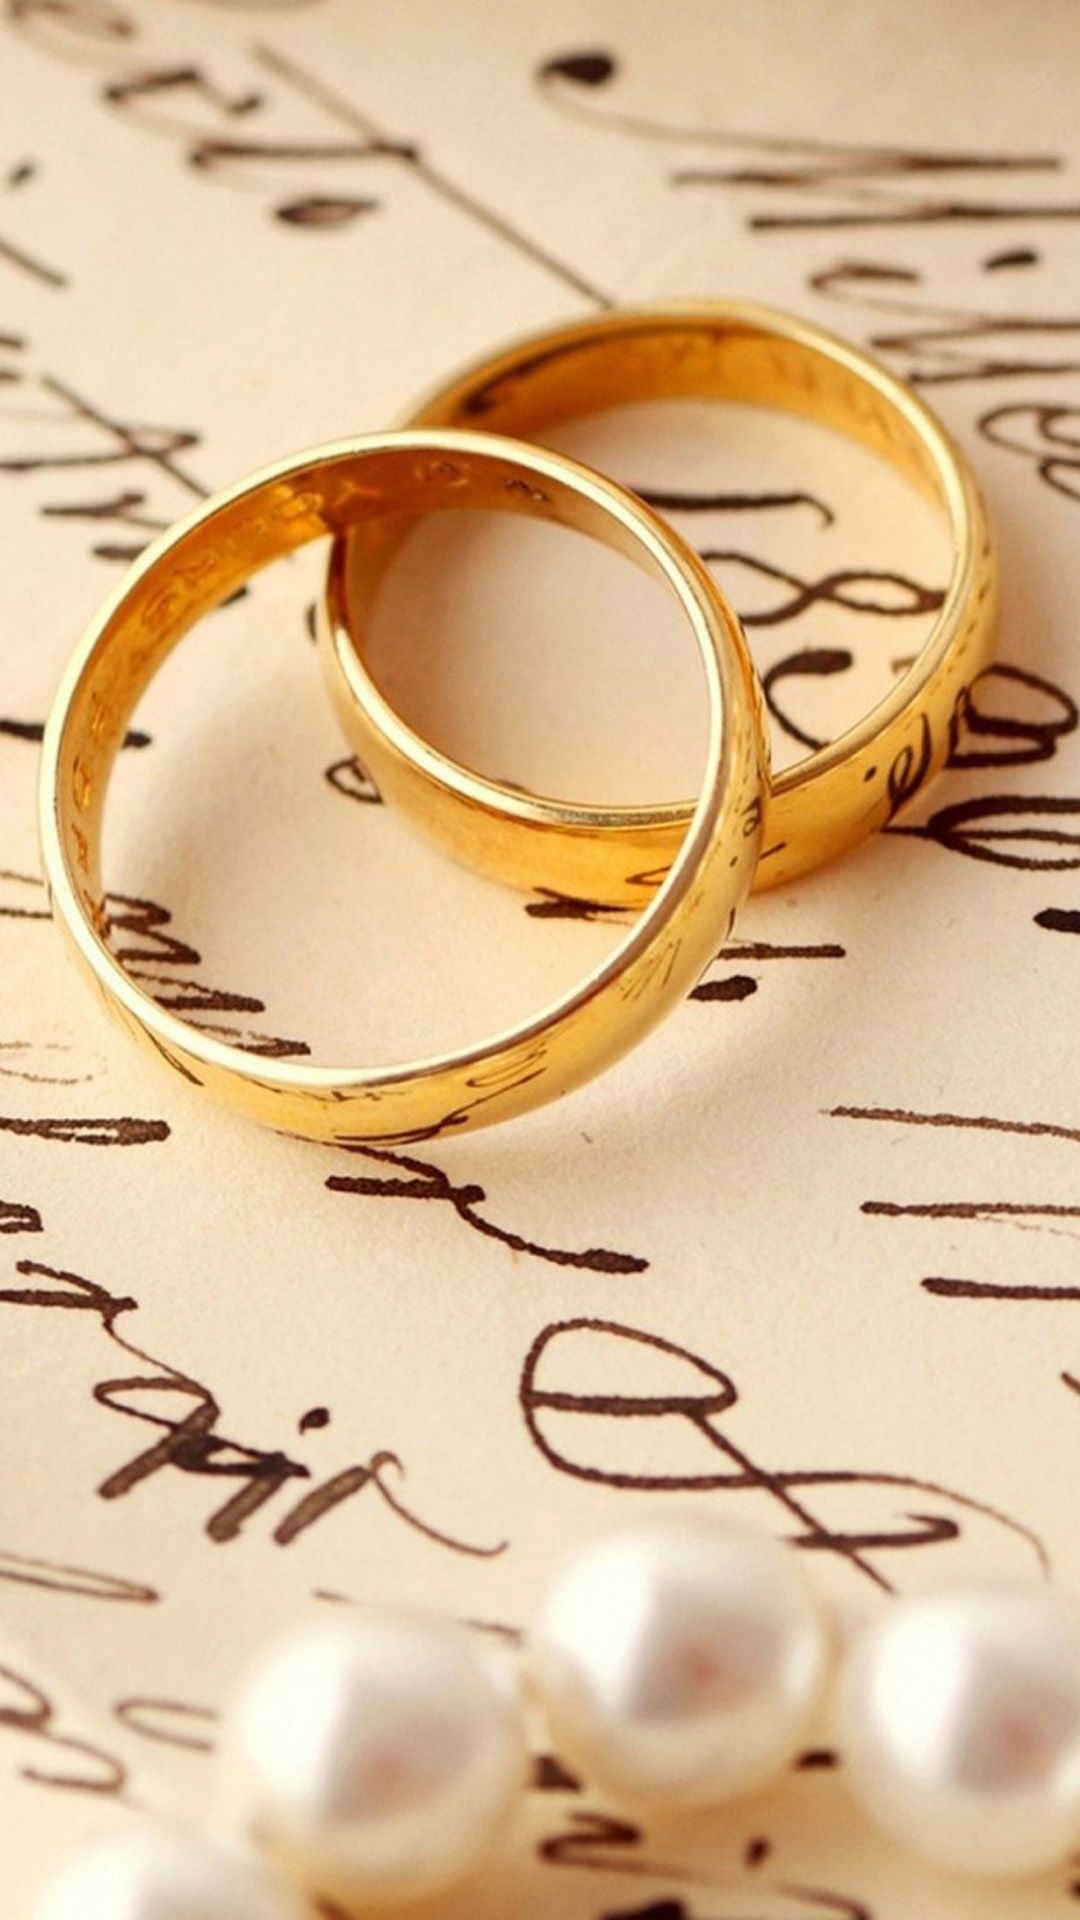 Love Romance Ring Pair On Book iPhone 6 Wallpaper Download | iPhone Wallpapers, iPad wallpapers One-stop Downlo | Iphone 5s wallpaper, Wallpaper iphone love, Rings 1080x1920